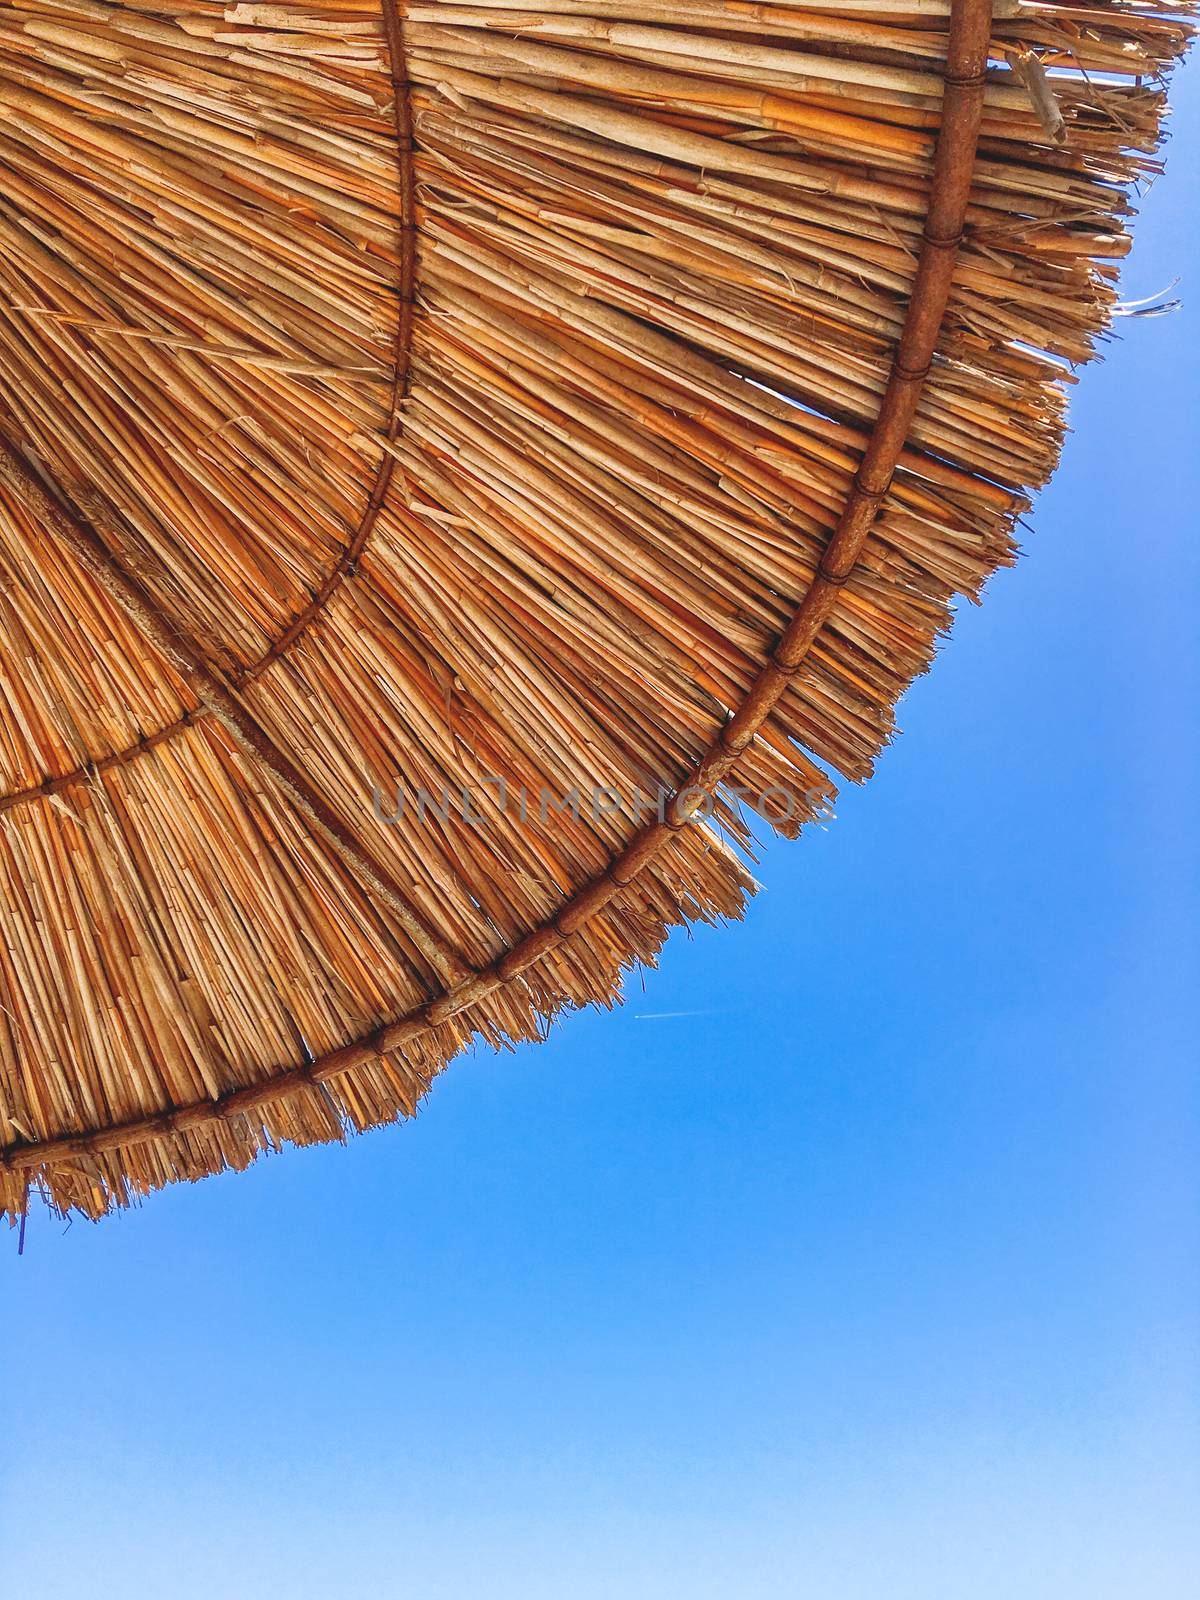 Bottom view of straw beach umbrella on clear blue sky background. Symbol of vacation, rest and relaxation. Kemer, Turkey. by aksenovko